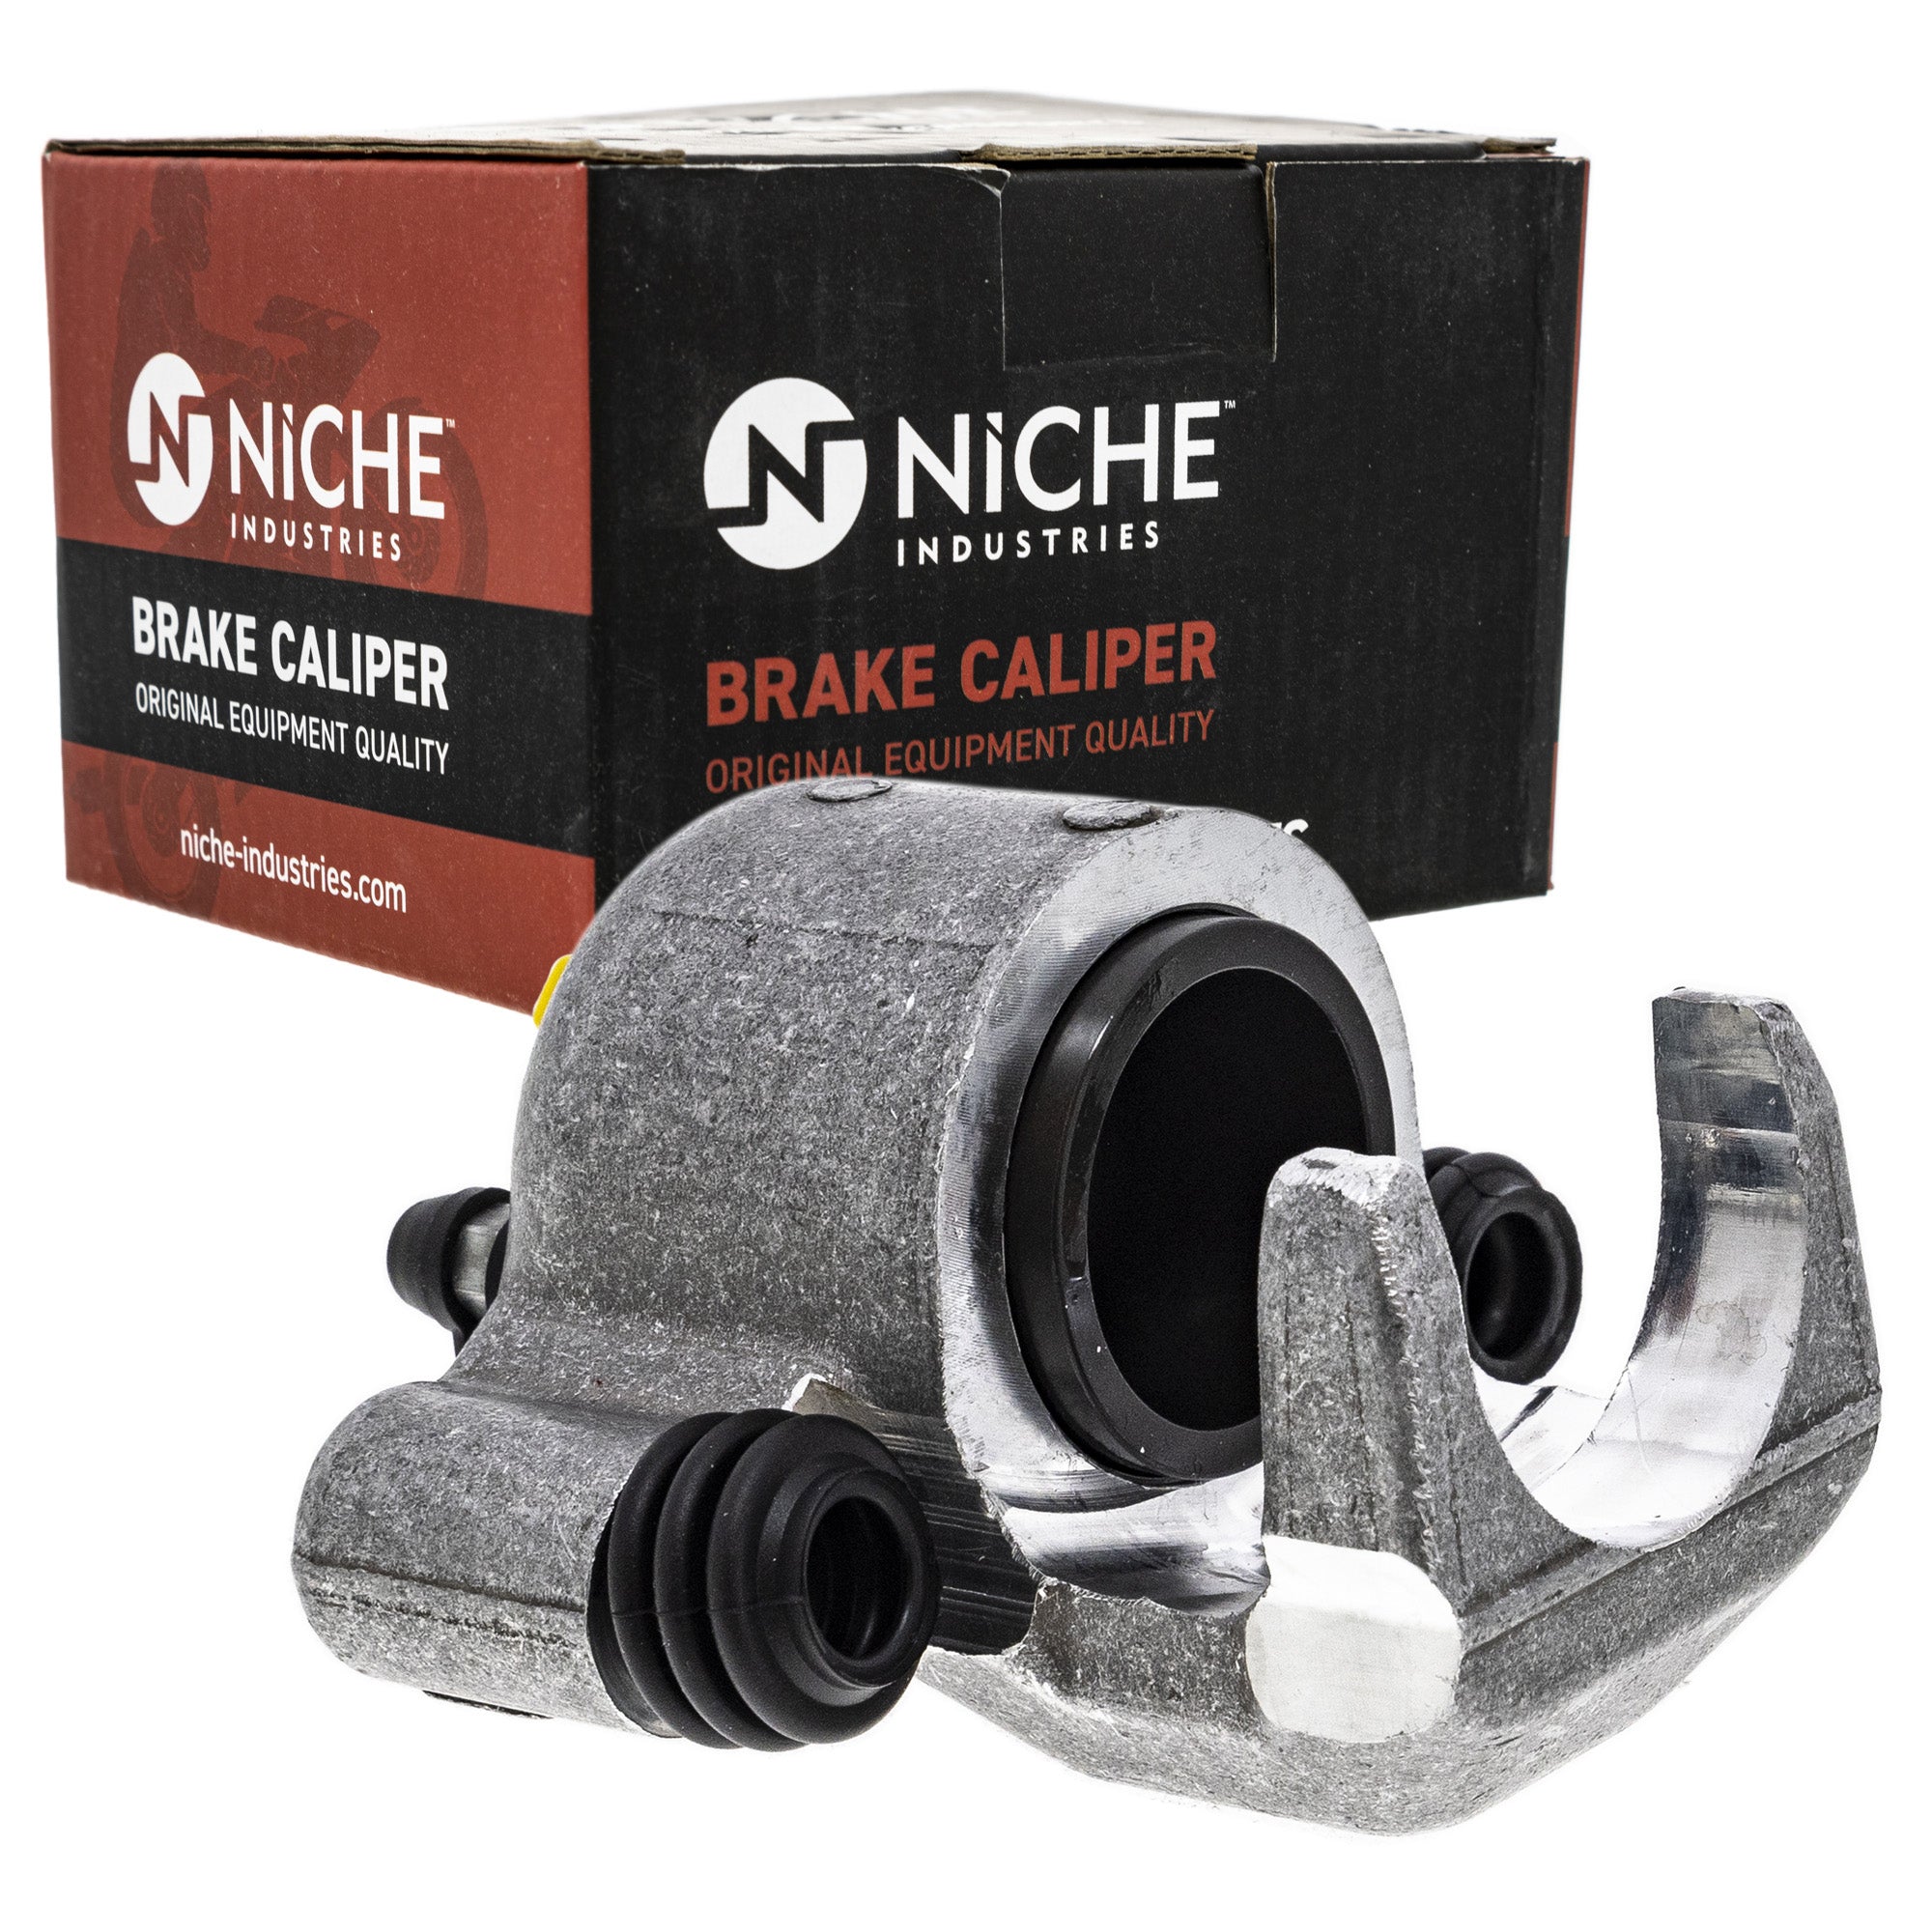 NICHE 519-CCL2229P Brake Caliper Assembly 2-Pack for zOTHER Polaris